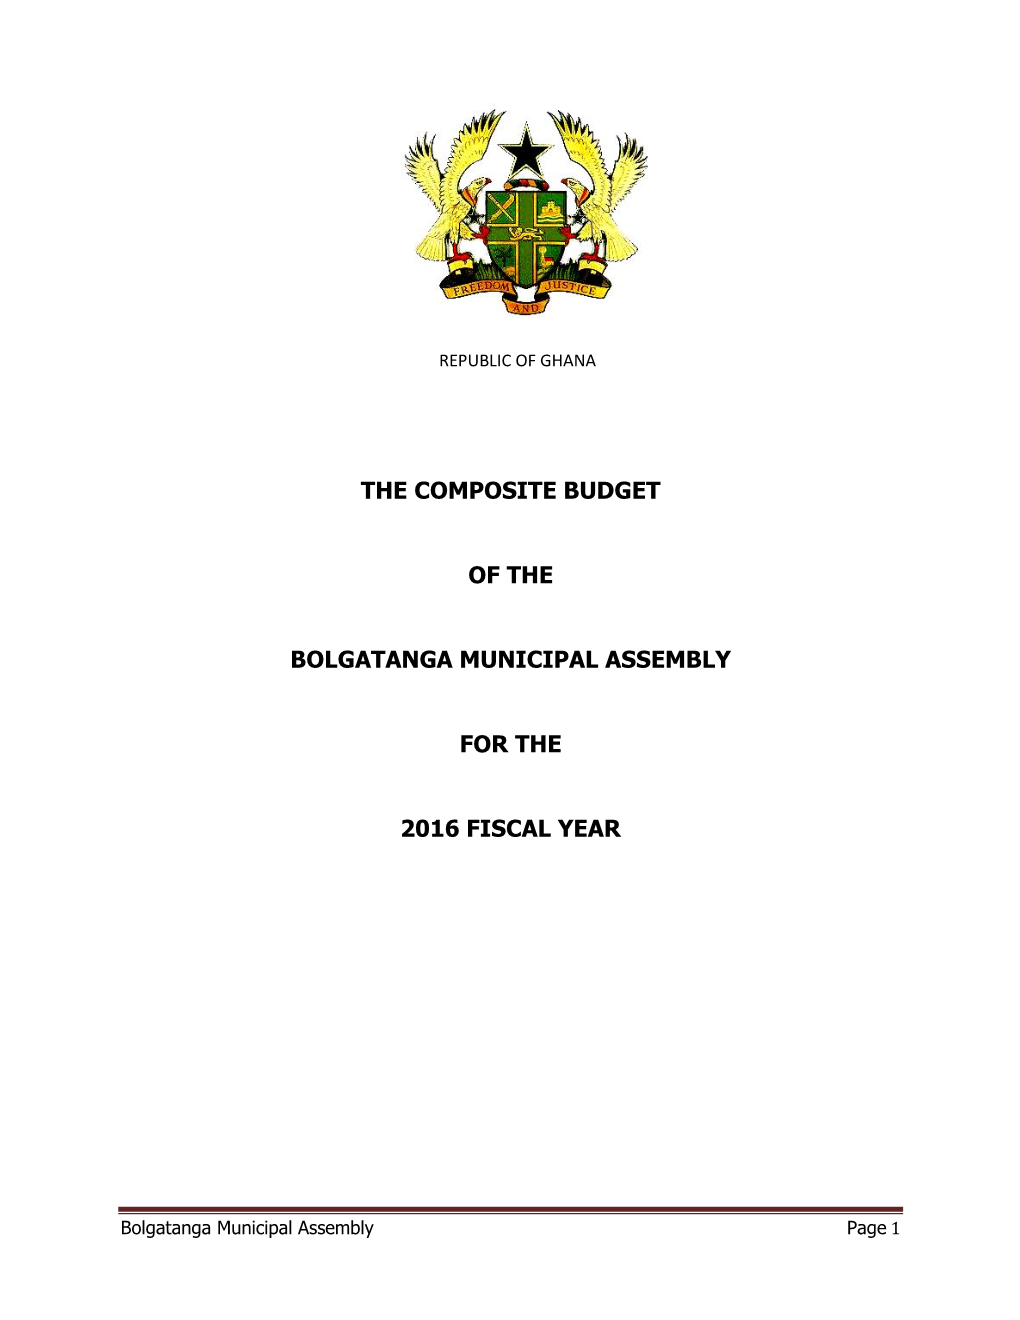 The Composite Budget of The